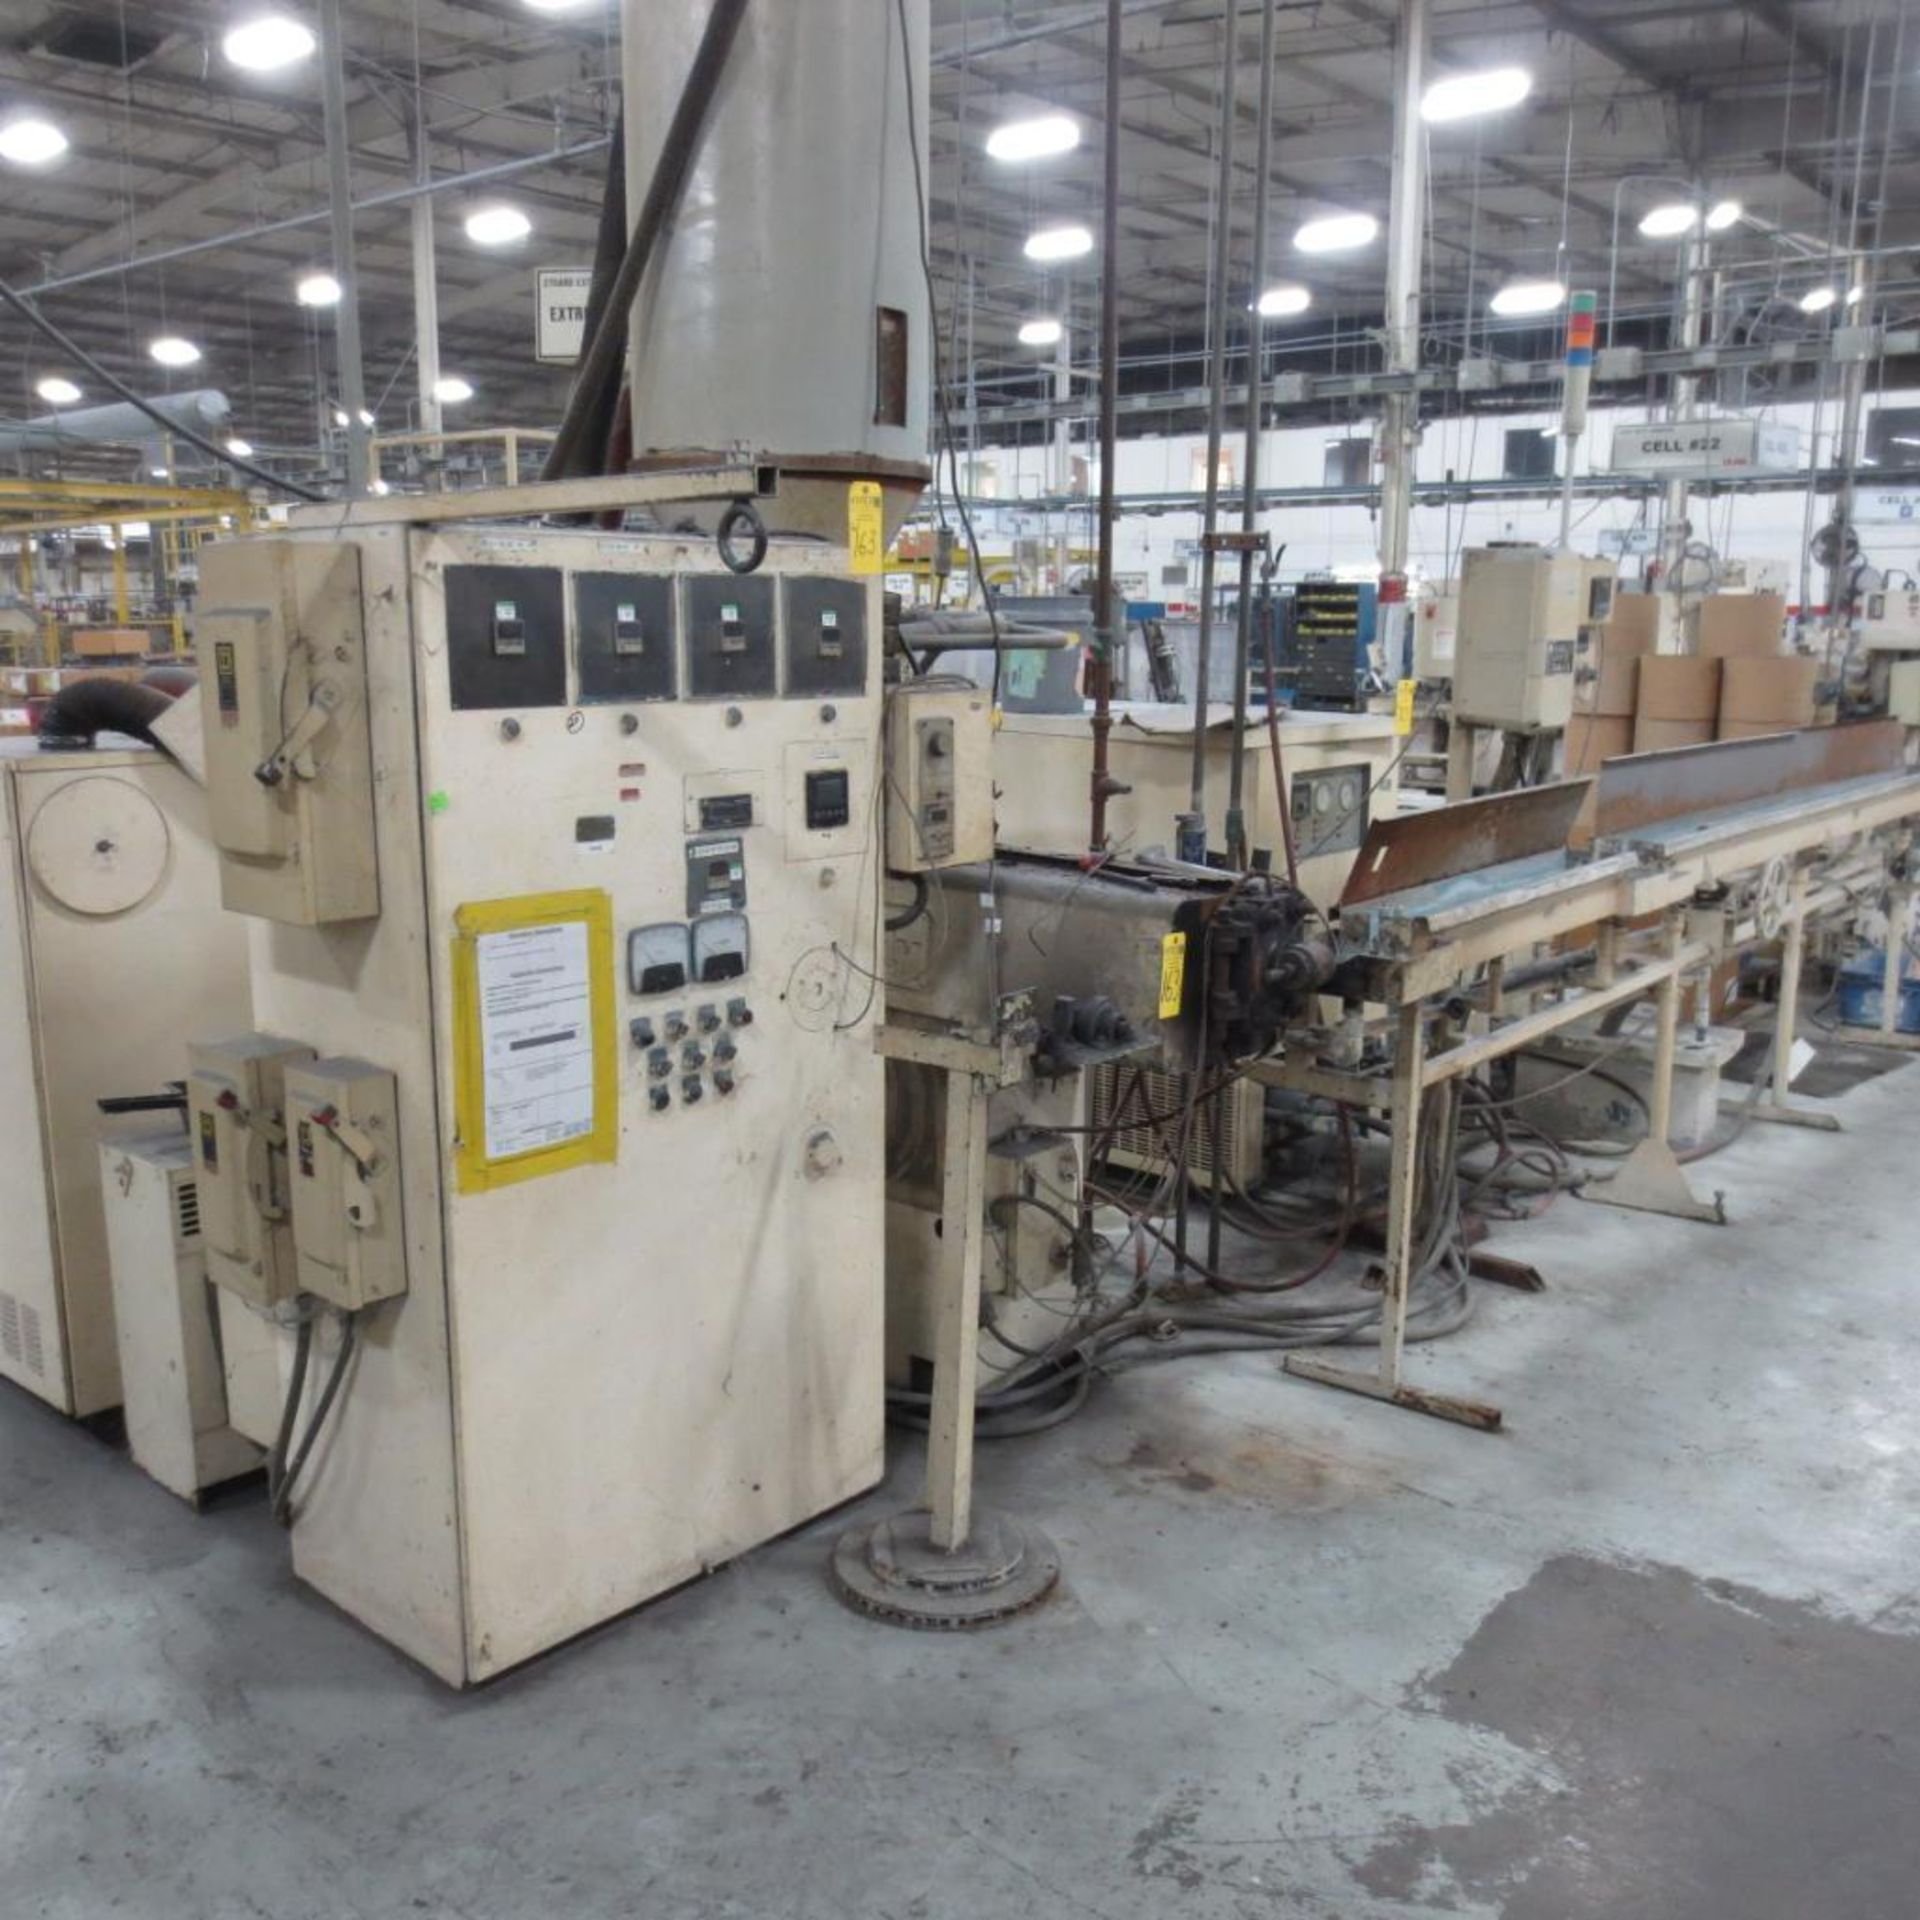 NRM 2 1/2 Rubber Extruder, Ratio 30, Year 1976, with Thorson Mccosh Mdl. TD90 Dryer and Chiller, S/N